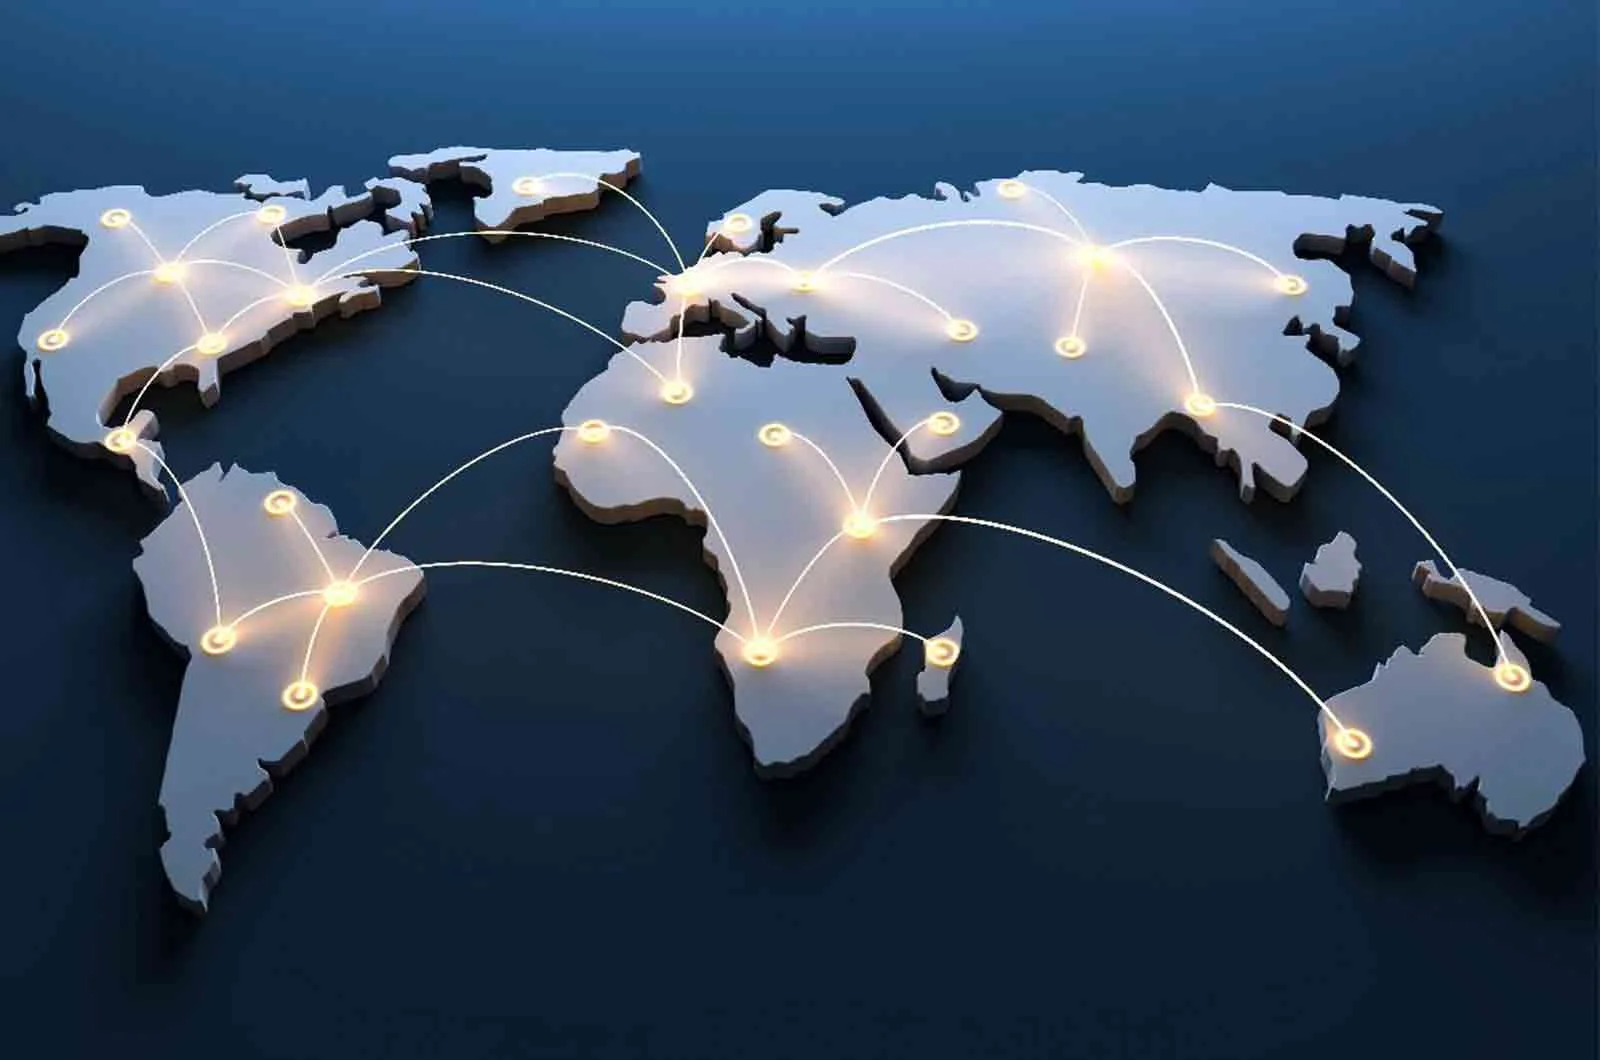 World map with locations marked with yellow lights and beams connecting them. Concept of website localisation.